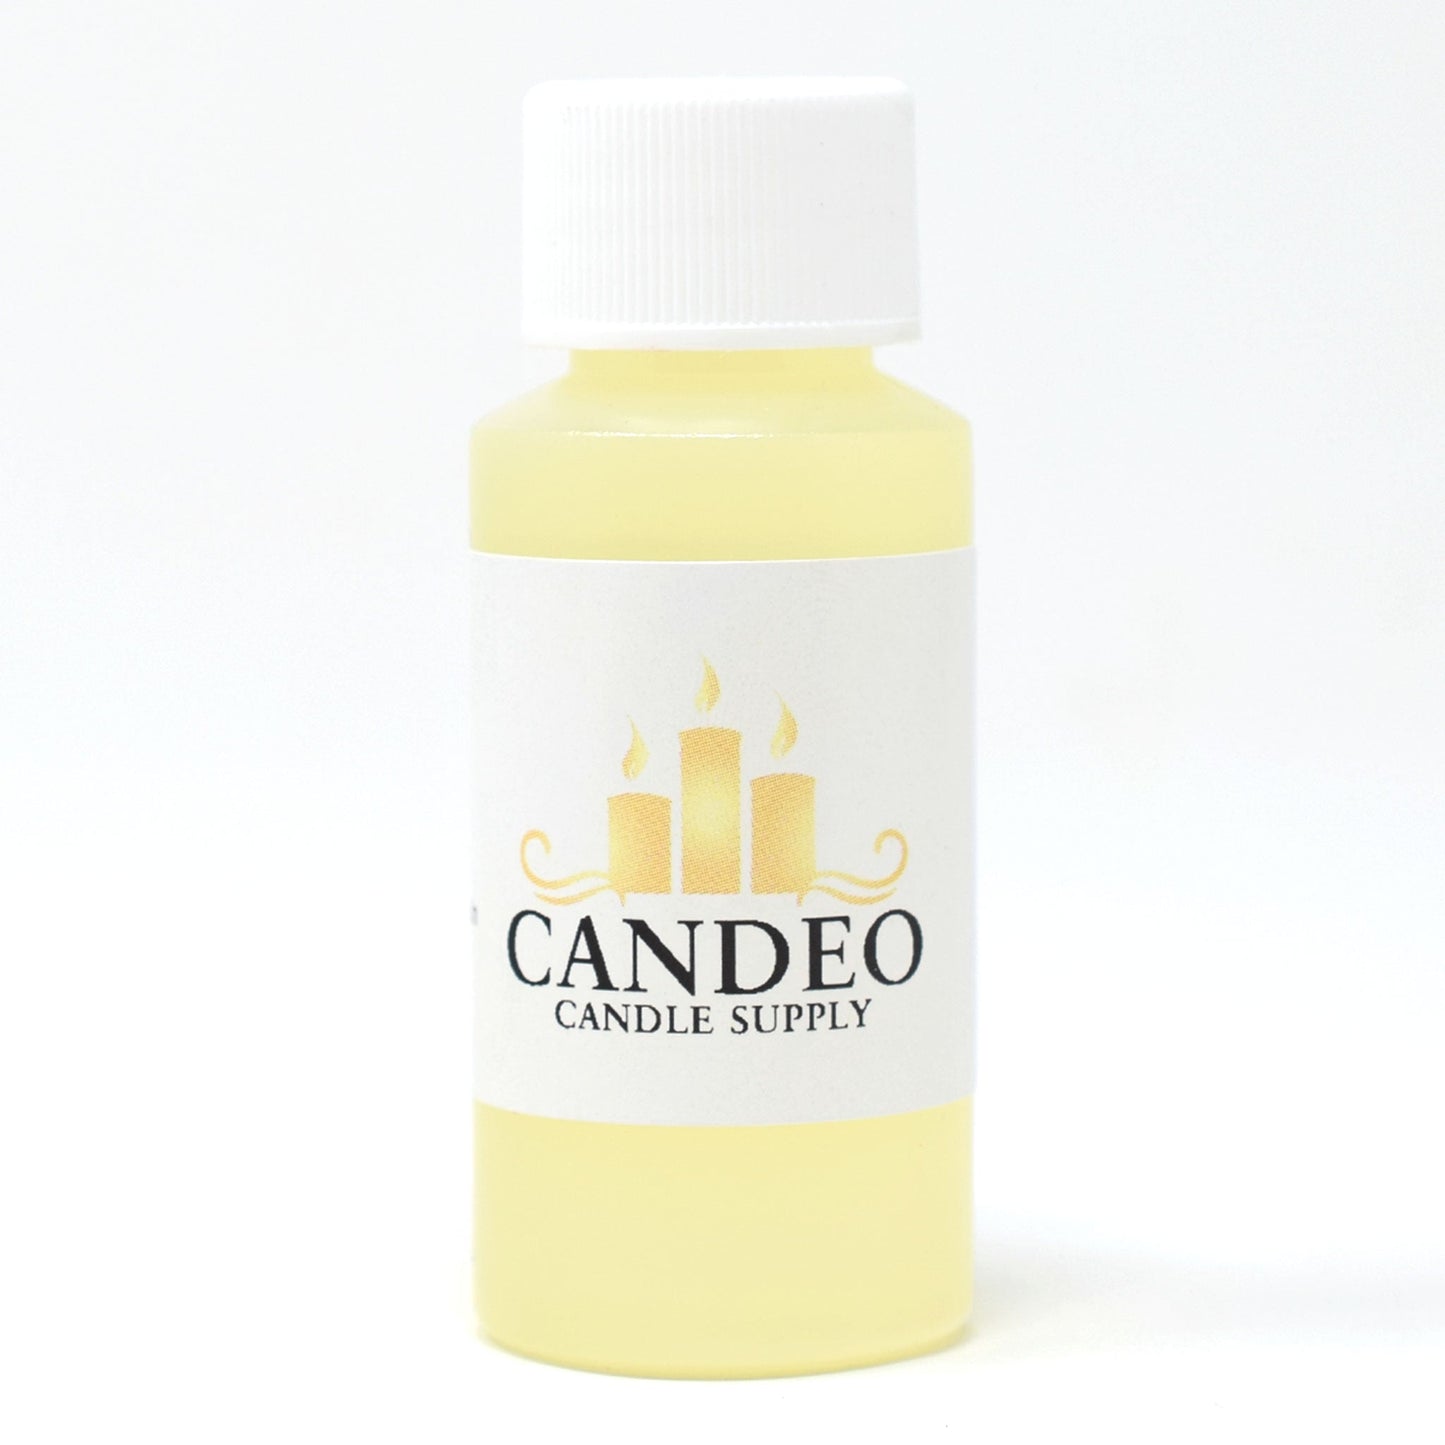 Winter Lodge Fragrance Oil - Candeo Candle Supply